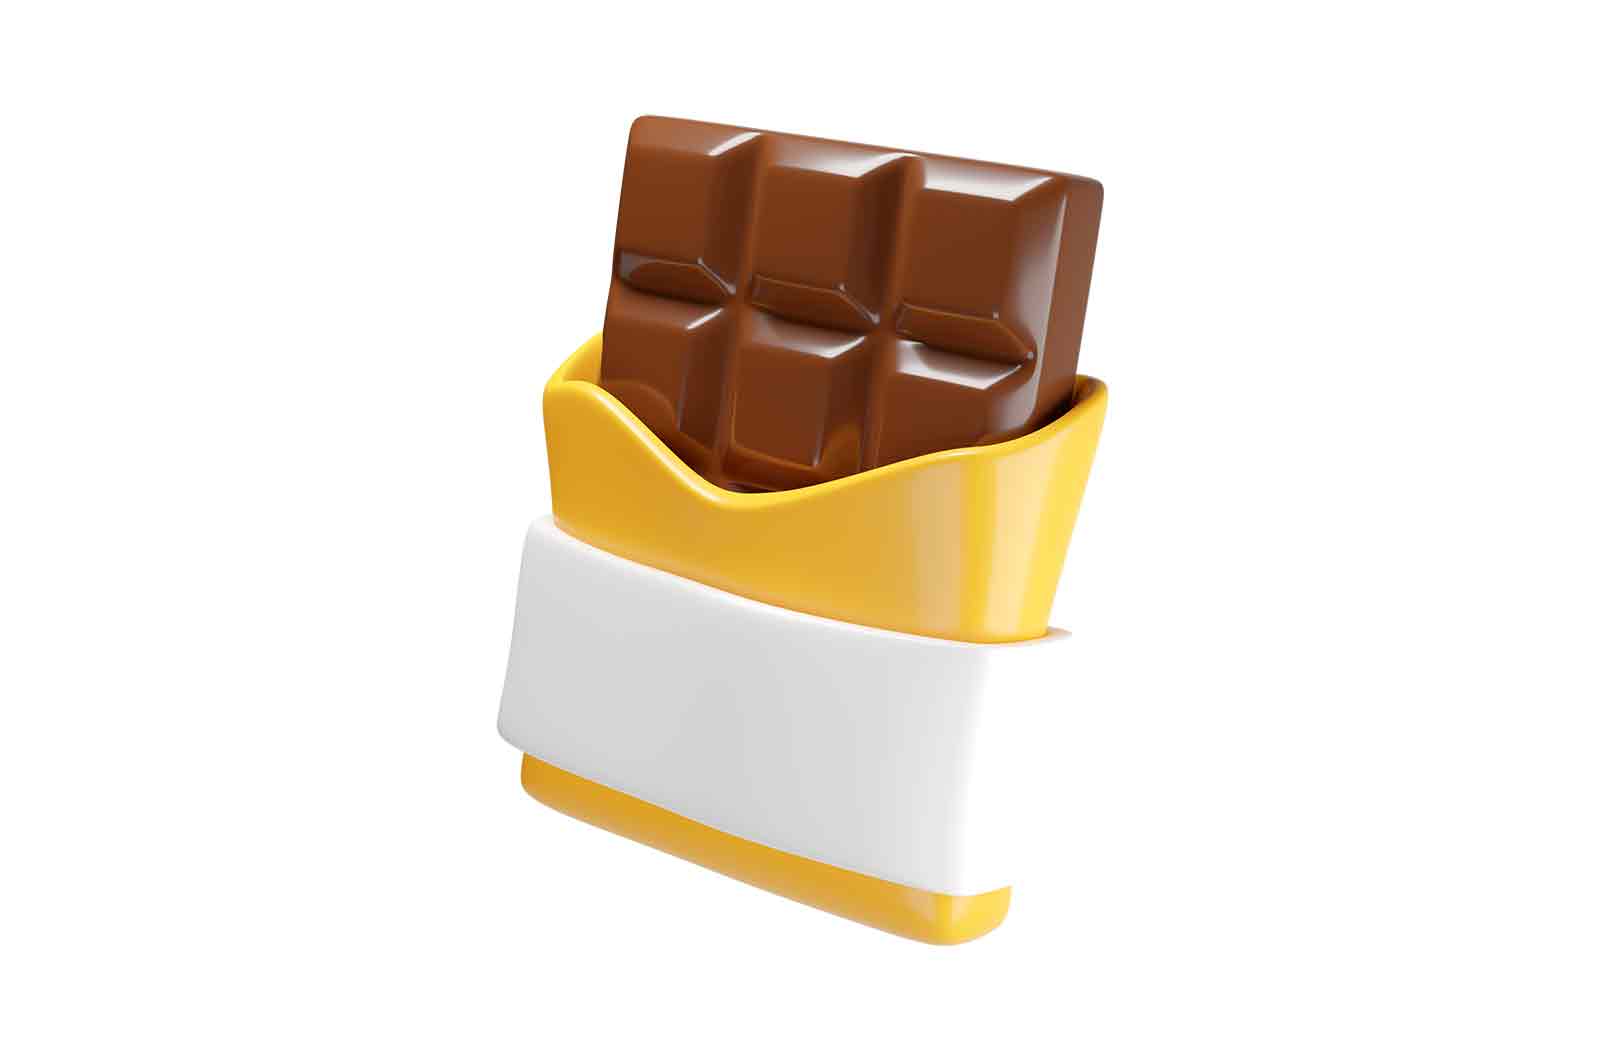 Chocolate bar, 3d rendered illustration of a delicious snack in a yellow and white wrapper.